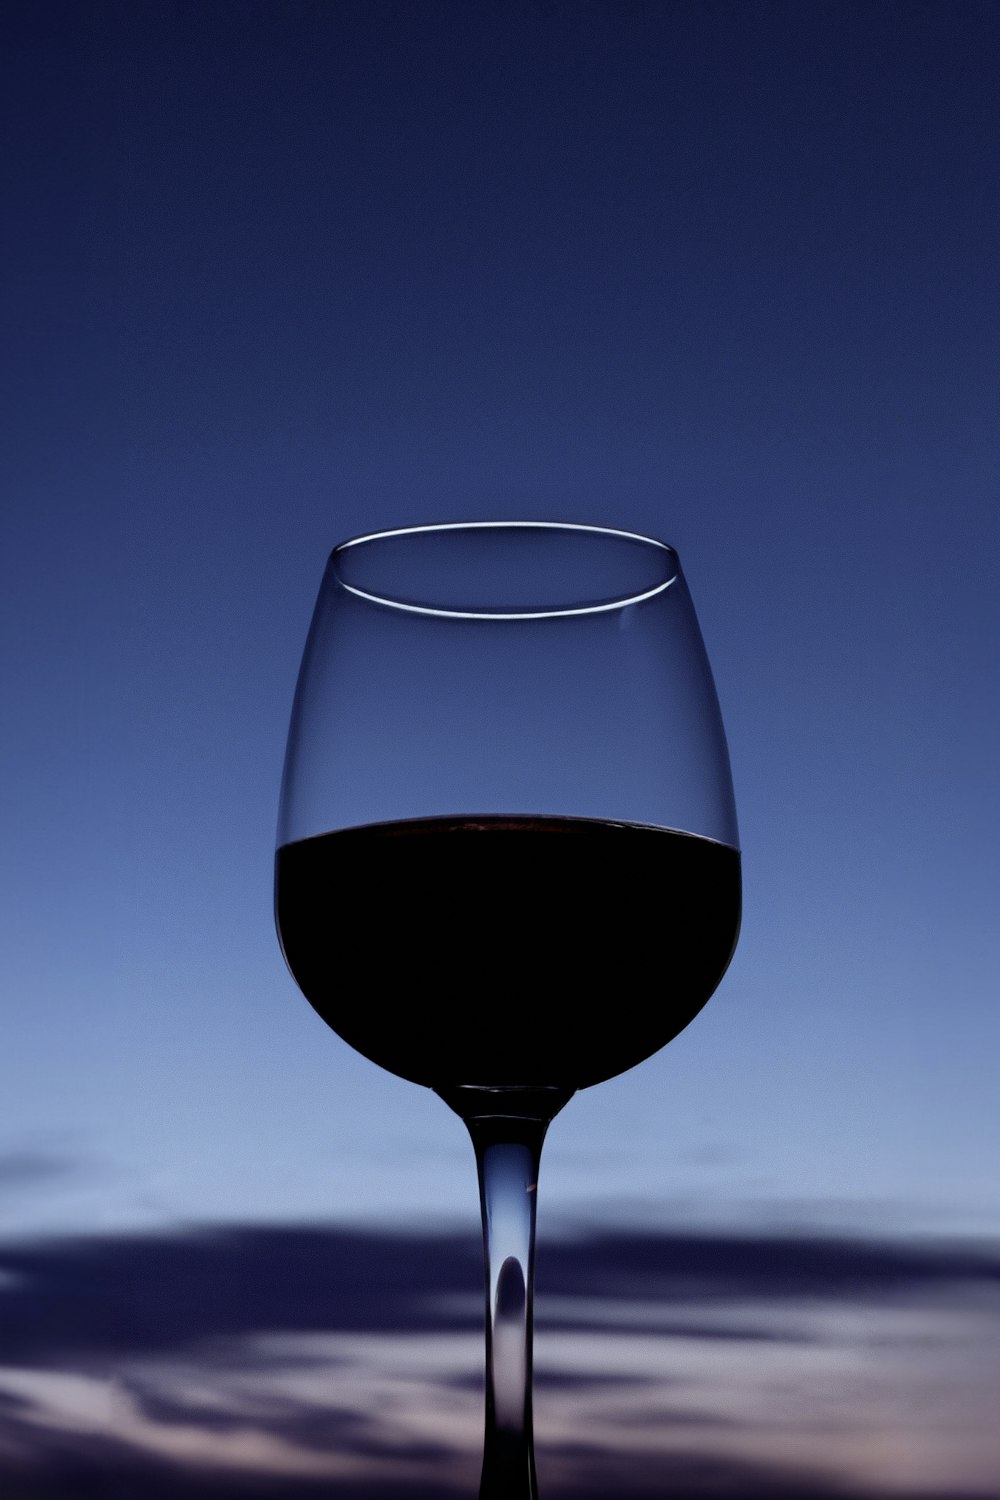 a close up of a wine glass with a sky in the background